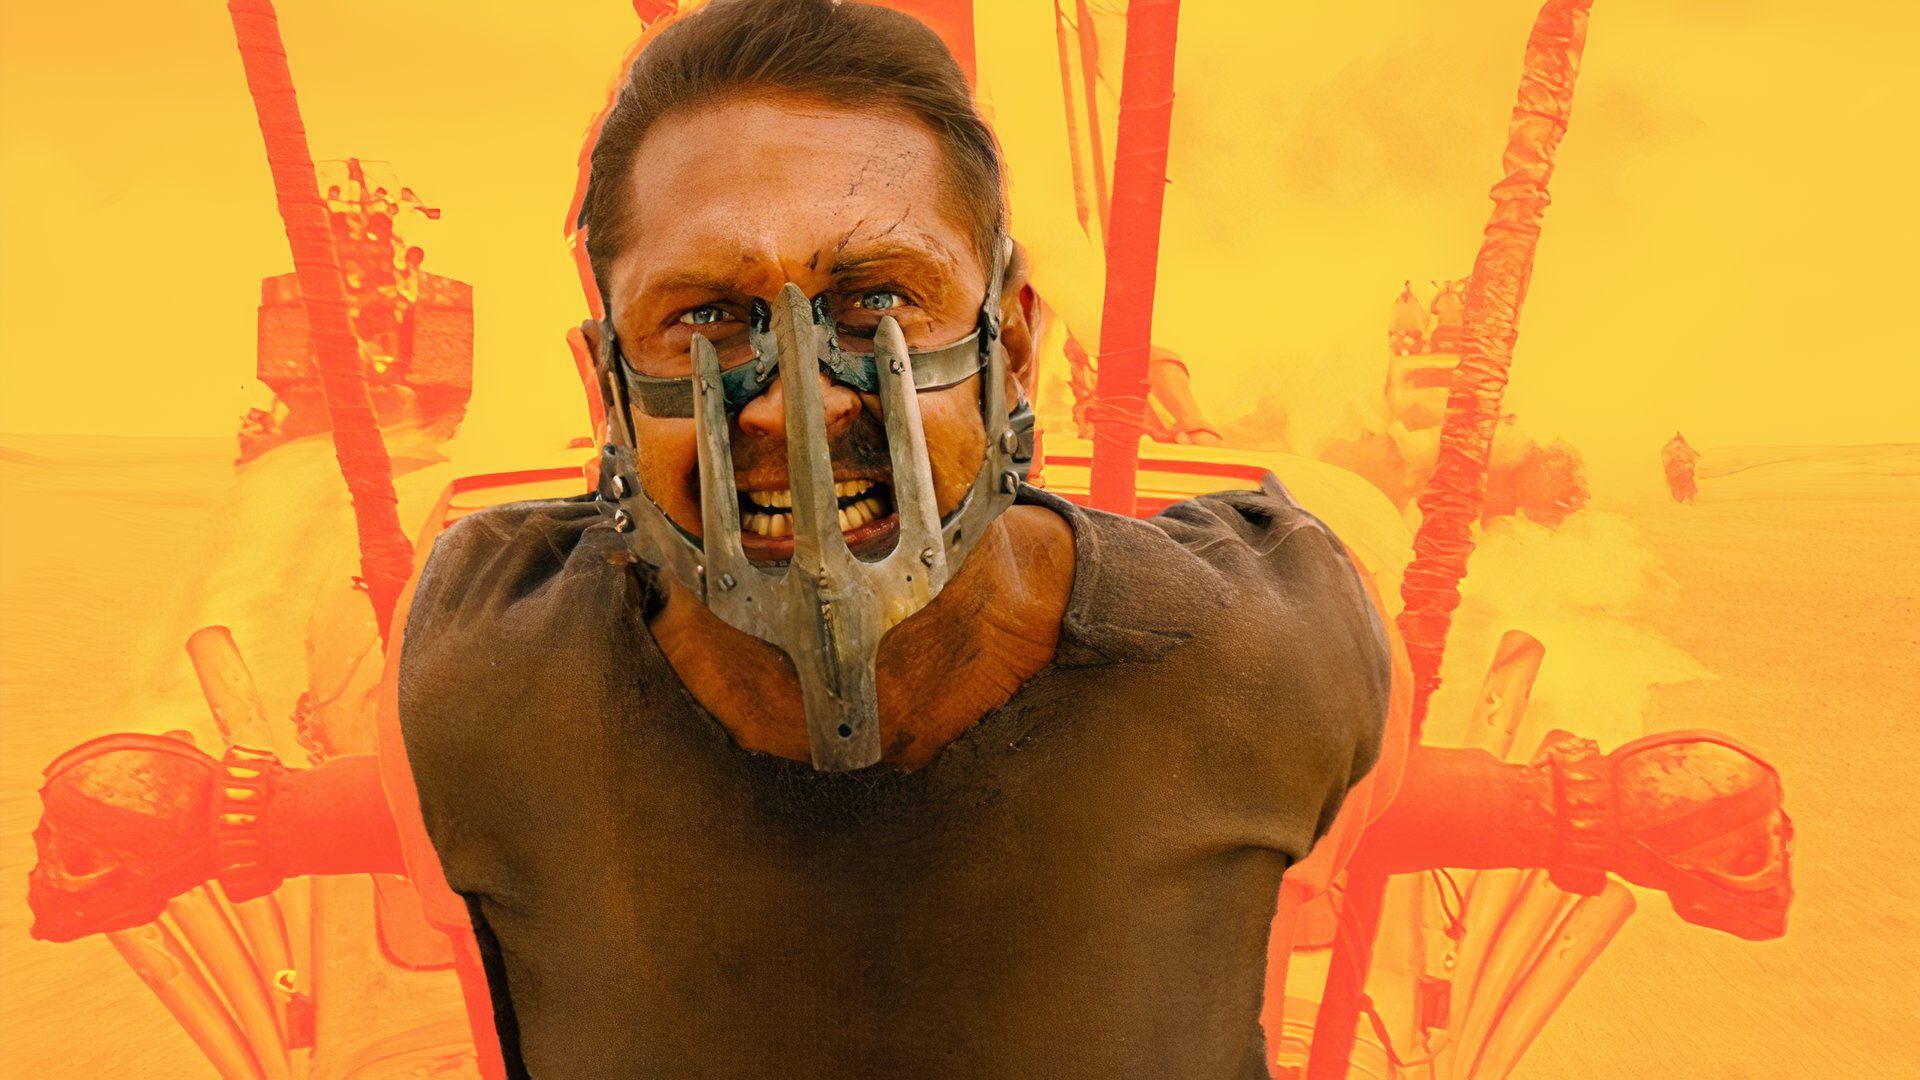 Tom Hardy tied up and masked as Mad Max in Fury Road.